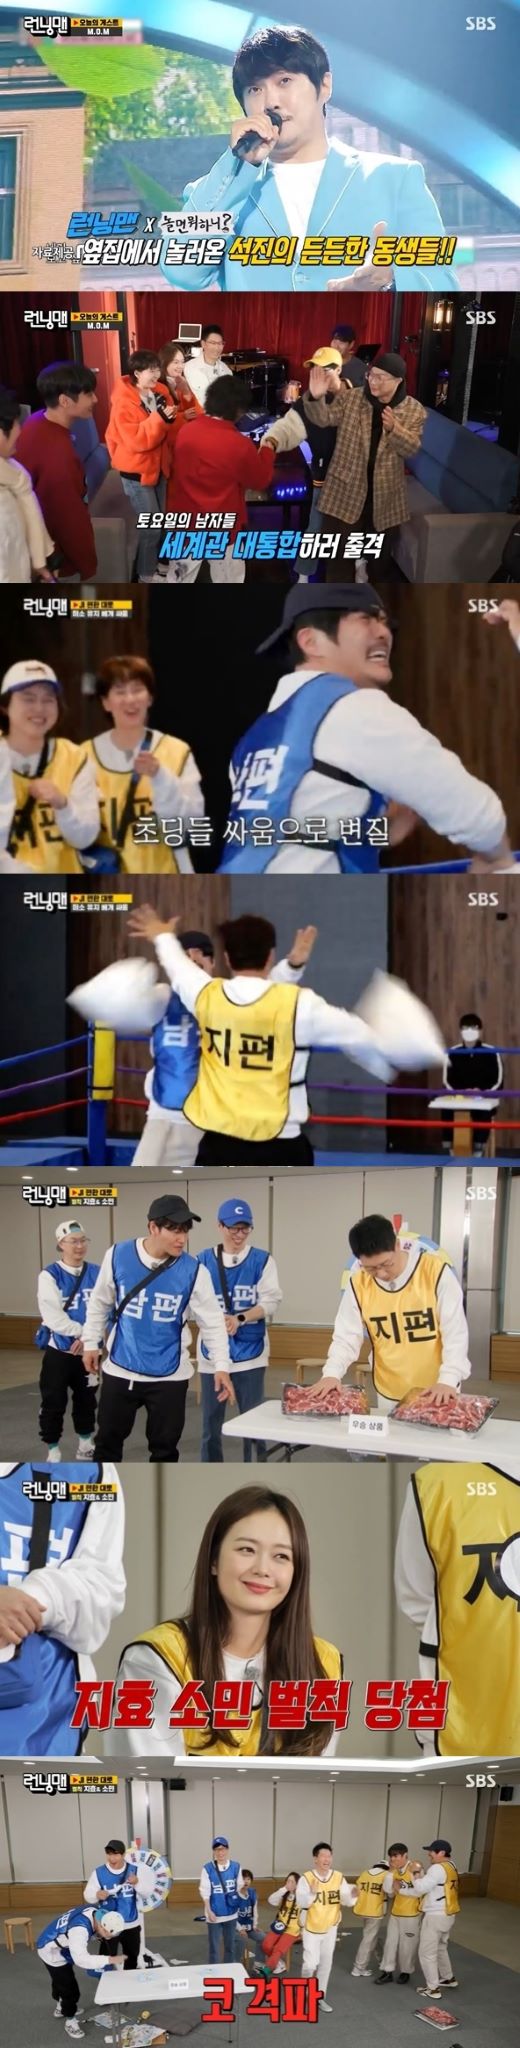 SBS Running Man, which met with project group M.O.M, ranked first in the same time zone.Running Man, which was broadcast on the 27th, ranked first in the same time zone with 5.9% of ratings and 3.1% of 2049 ratings (hereinafter based on Nielsen Korea metropolitan area and households), and the highest audience rating per minute jumped to 8.9%.The show was accompanied by M.O.M members (KCM, Park Jae-jung, and Wonstein), a project group of What to Play, which had been a hot topic since the comeback of Dumb Sisters Song Ji-hyo and Jeon So-min.M.O.M, which Ji Suk-jin belongs to, first showed a new song Do you want to hear live stage.The members cheered, but pointed out Ji Suk-jins favoritism of M.O.M and laughed, asking We should be loving.This race was always decorated with JI-as-comfortable Race with members of Running Man who are on Ji Suk-jin and Support Army M.O.M, and it was held as a solo exhibition of members centered on Ji Suk-jin.In the first round of Petepillar Fight, Kim Jong-kook and KCMs Big Match followed.Everyones expectation was focused on the rematch of the two men who had been confronted with arm wrestling in the past, but KCM was defeated by a mixture of laughter and crying in Kim Jong-kooks powerful pillow attack.Song Ji-hyo and Jeon So-min faced off with a fairy concave confrontation that could be played, and Song Ji-hyo took the victory.The last showdown was a yearly hit song-to-play showdown.When the sad misrepresentations followed, Jang Bum-joons song title I felt your shampoo in the shaking flowers in the middle of the game, all the members were wrong about the word one by one, and this scene was the highest audience rating of 8.9% per minute.Meanwhile, Ji Suk-jin, who played the game rule in the early stages, took a big victory in the second half.However, in the Ji Suk-jin Quiz for roulette, I was wrong in the quiz, and even Yoo Jae-Suk could not meet the date of birth of Ji Suk-jin, which caused Ji Suk-jins anger.Races final first place was won by Wenstein and second by Park Jae-jung.Race main character Ji Suk-jin turned roulette to win product and Song Ji-hyo and Jeon So-min were penalized.It was a penalty to hit each others noses, and Yoo Jae-Suk came out for the dumbs who did not do it properly.Yoo Jae-Suk hit Ji Suk-jins nose directly and showed Jangku up to the end.